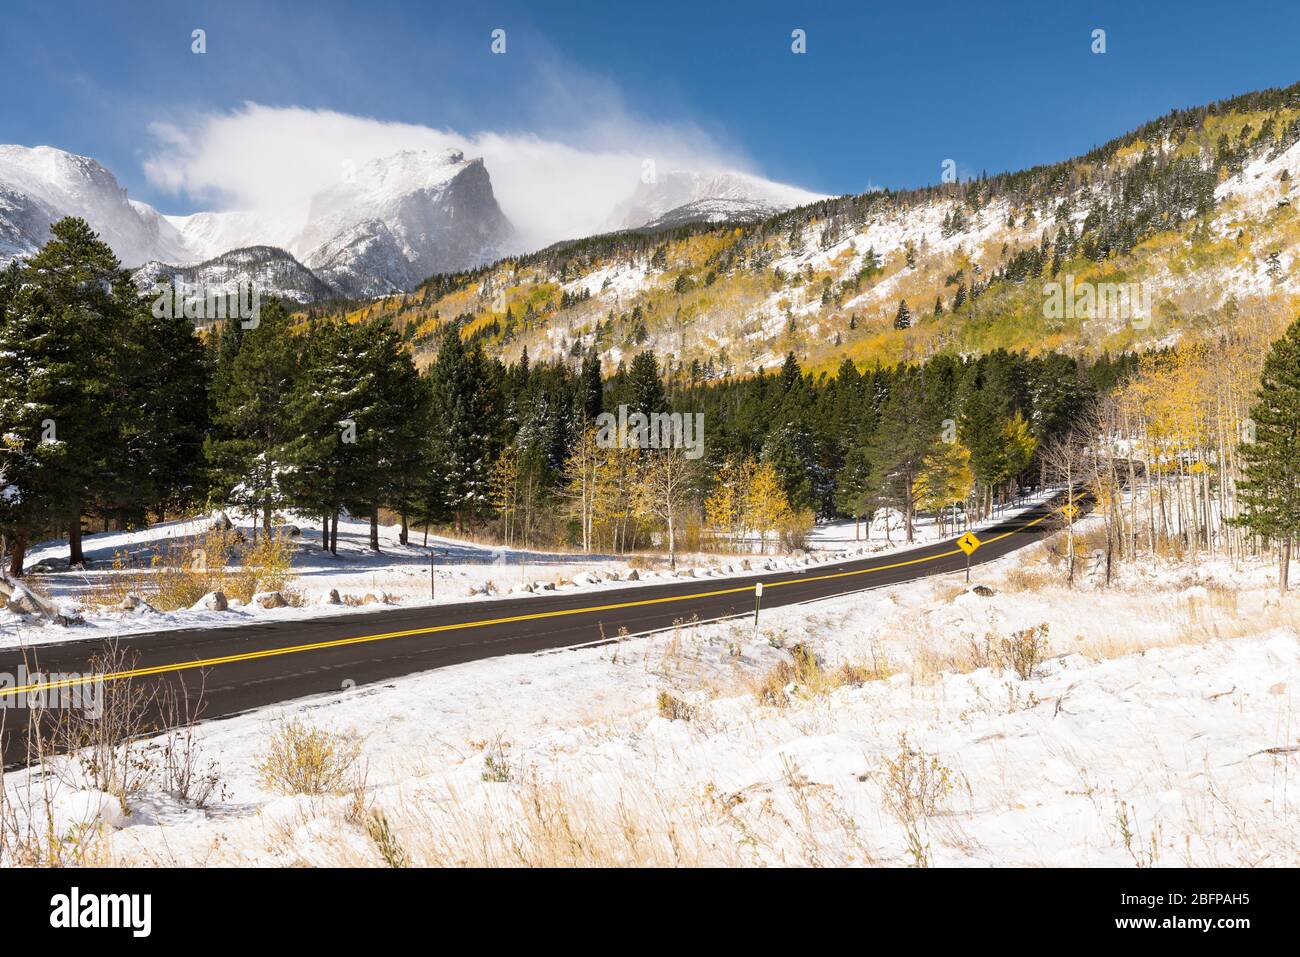 12,713 ft. Hallet Peak and 12,324 ft. Flattop Mountain a scenic paved road takes visitors through the rich scenery of an early autumn snow storm. Stock Photo